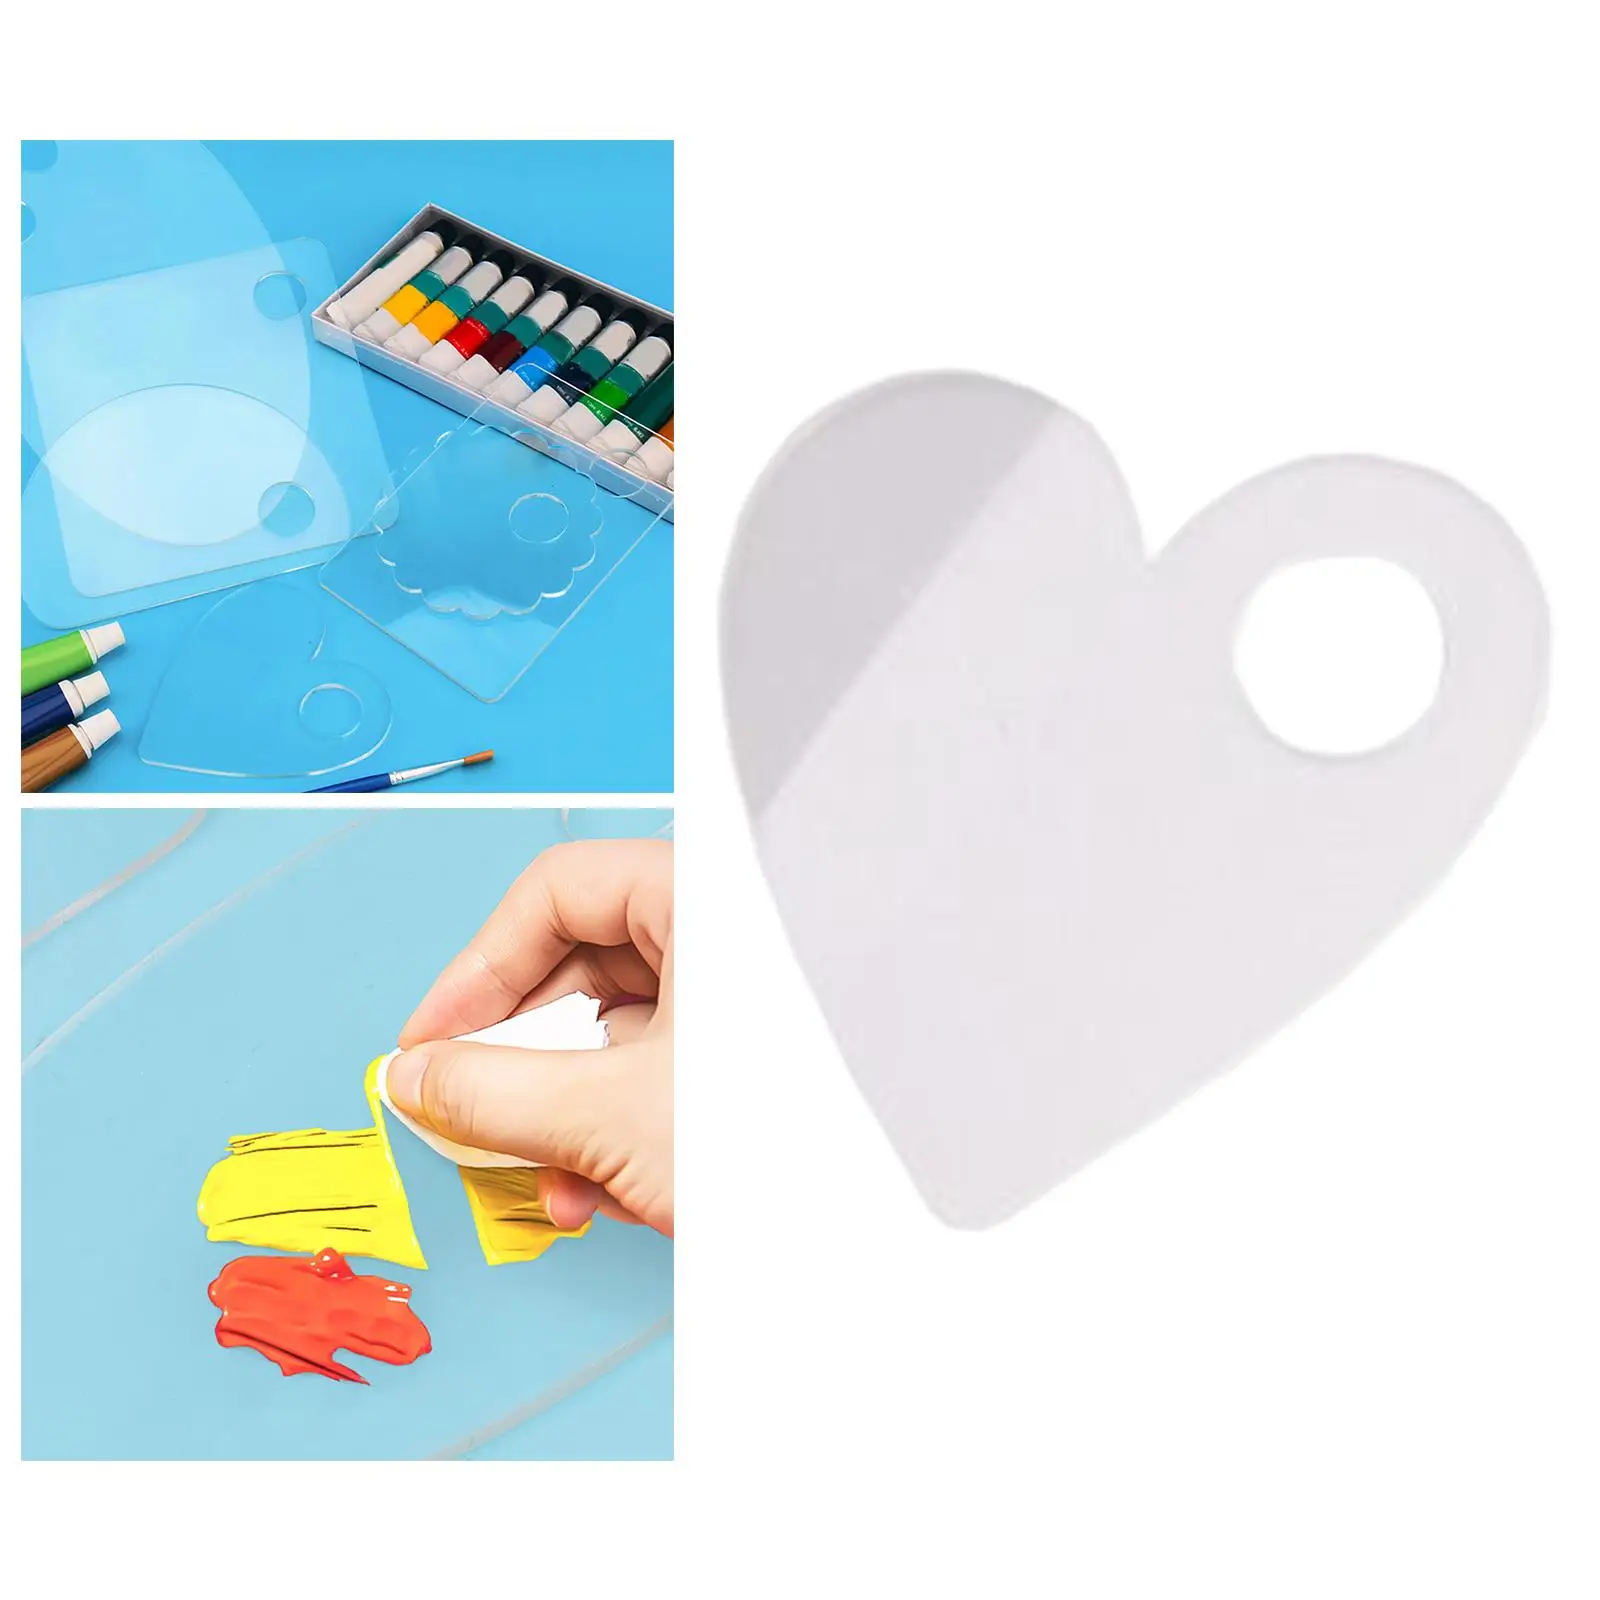 Professional Oil Paint Palette with Thumb Hole Non Stick Holder Acrylic Clear Mixing Palette for Gouache Watercolor DIY Painting